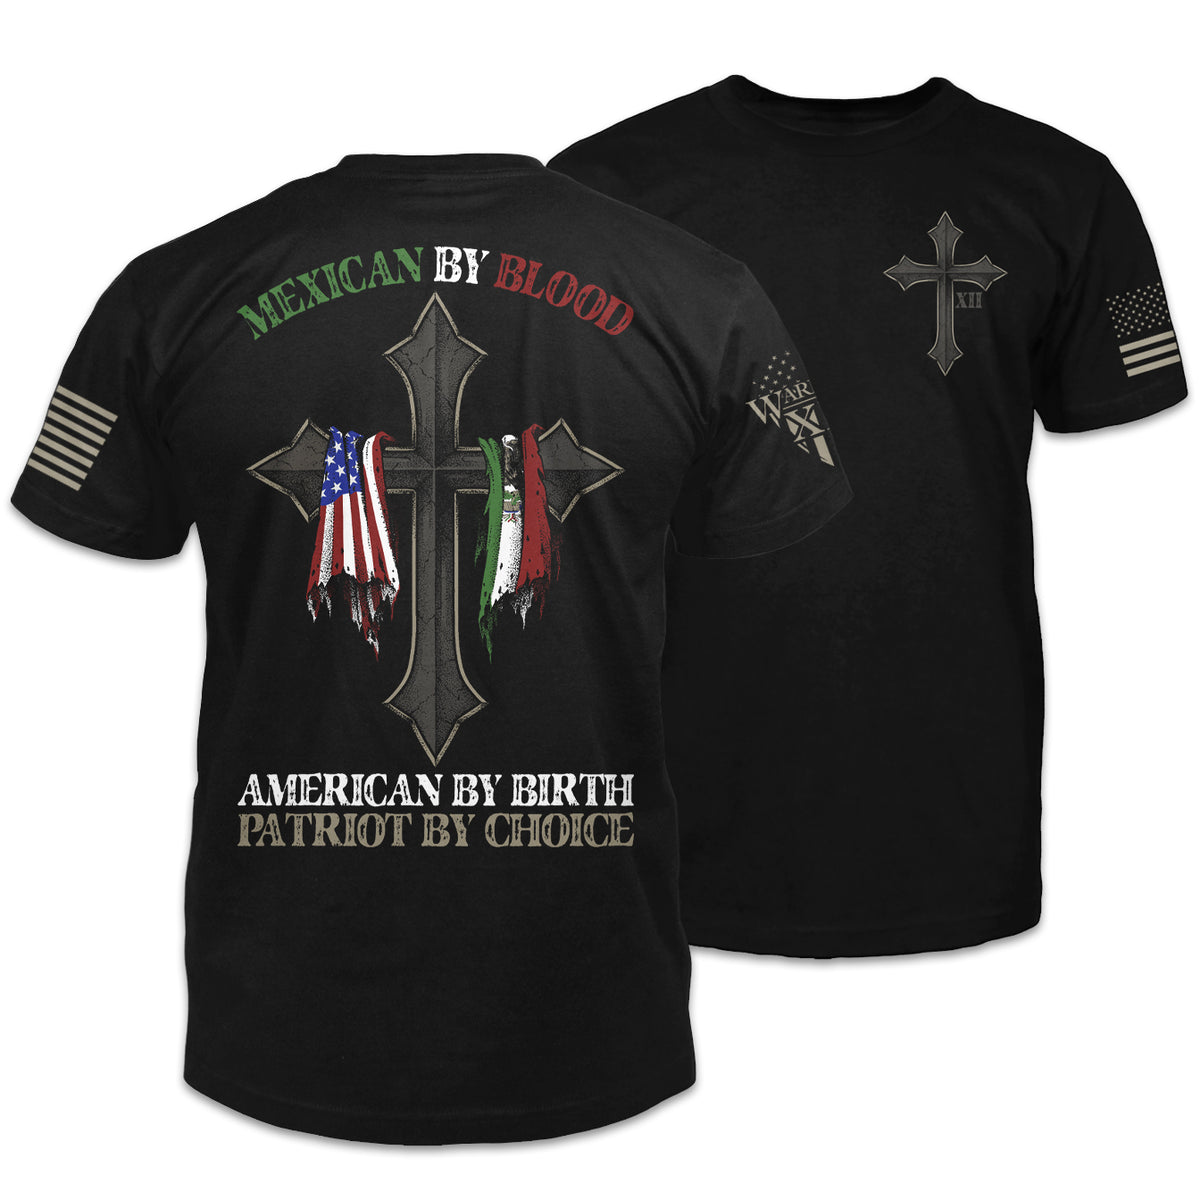 Front & back black t-shirt with the words "Mexican by blood, American by birth, patriot by choice" with a cross holding the American and Mexican flag printed on the shirt. 